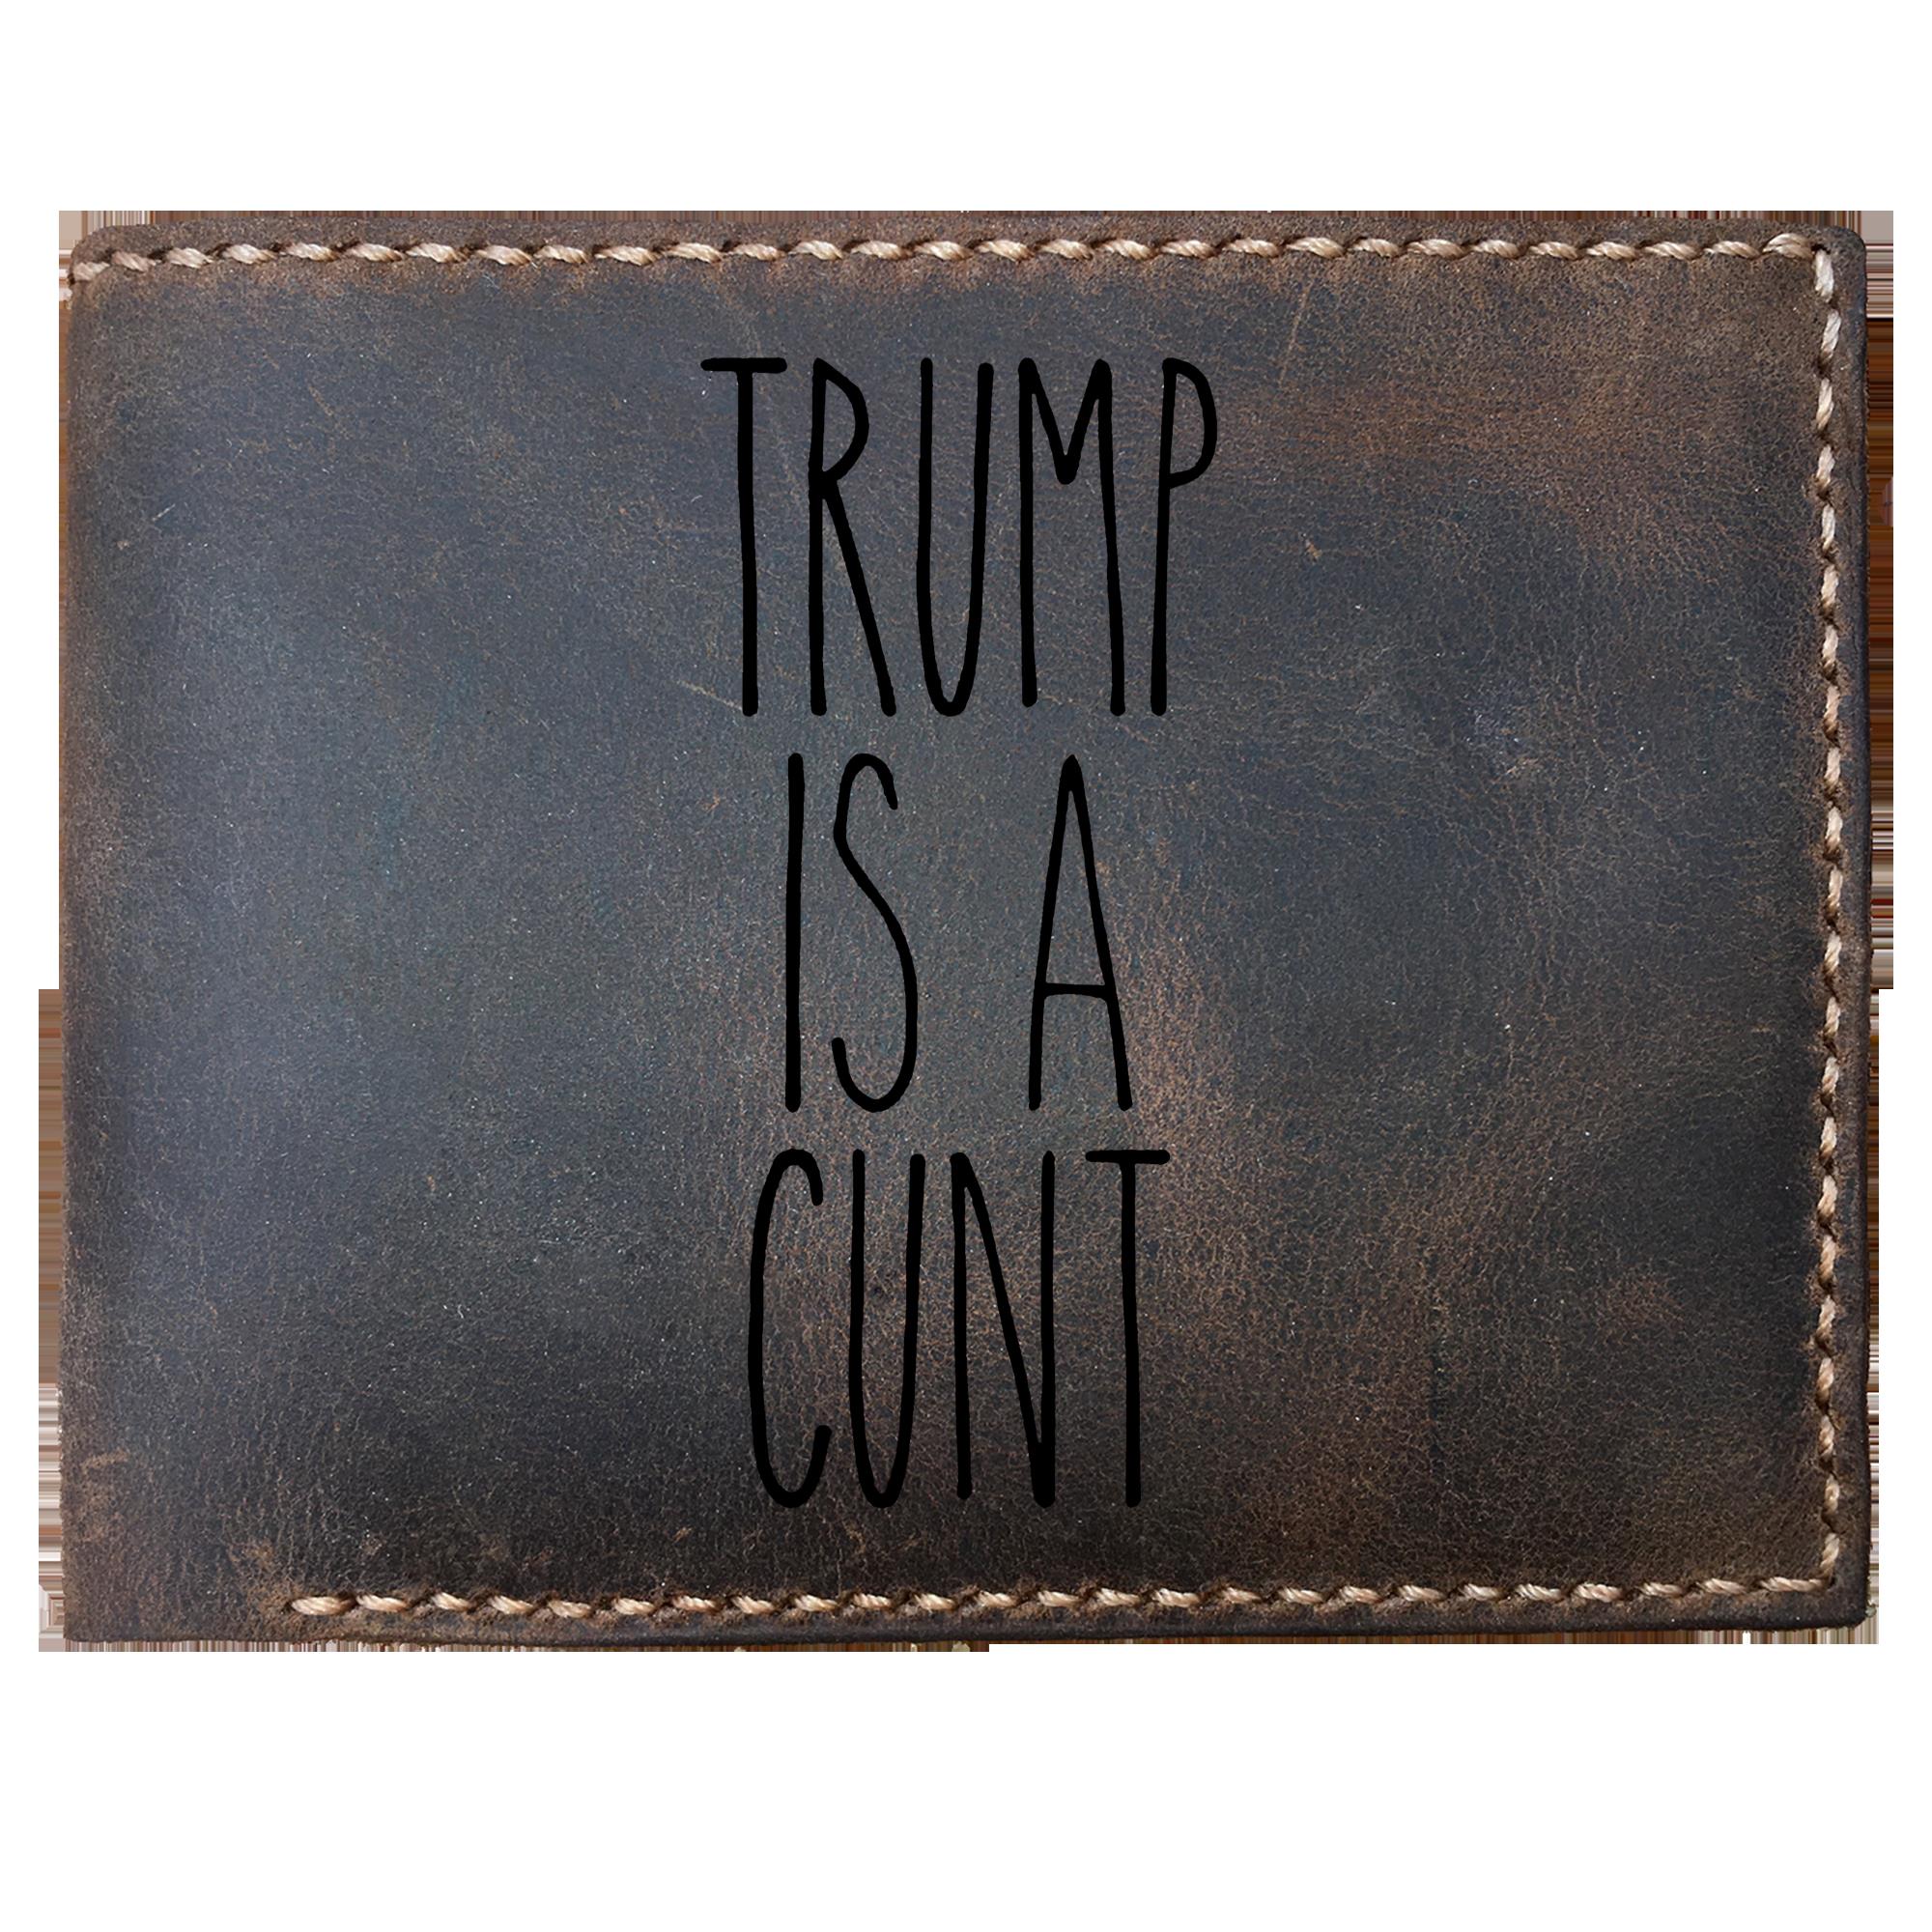 Skitongifts Funny Custom Laser Engraved Bifold Leather Wallet For Men, Trump Is A Cunt Anti Trump Trump Hater Funny Democrat